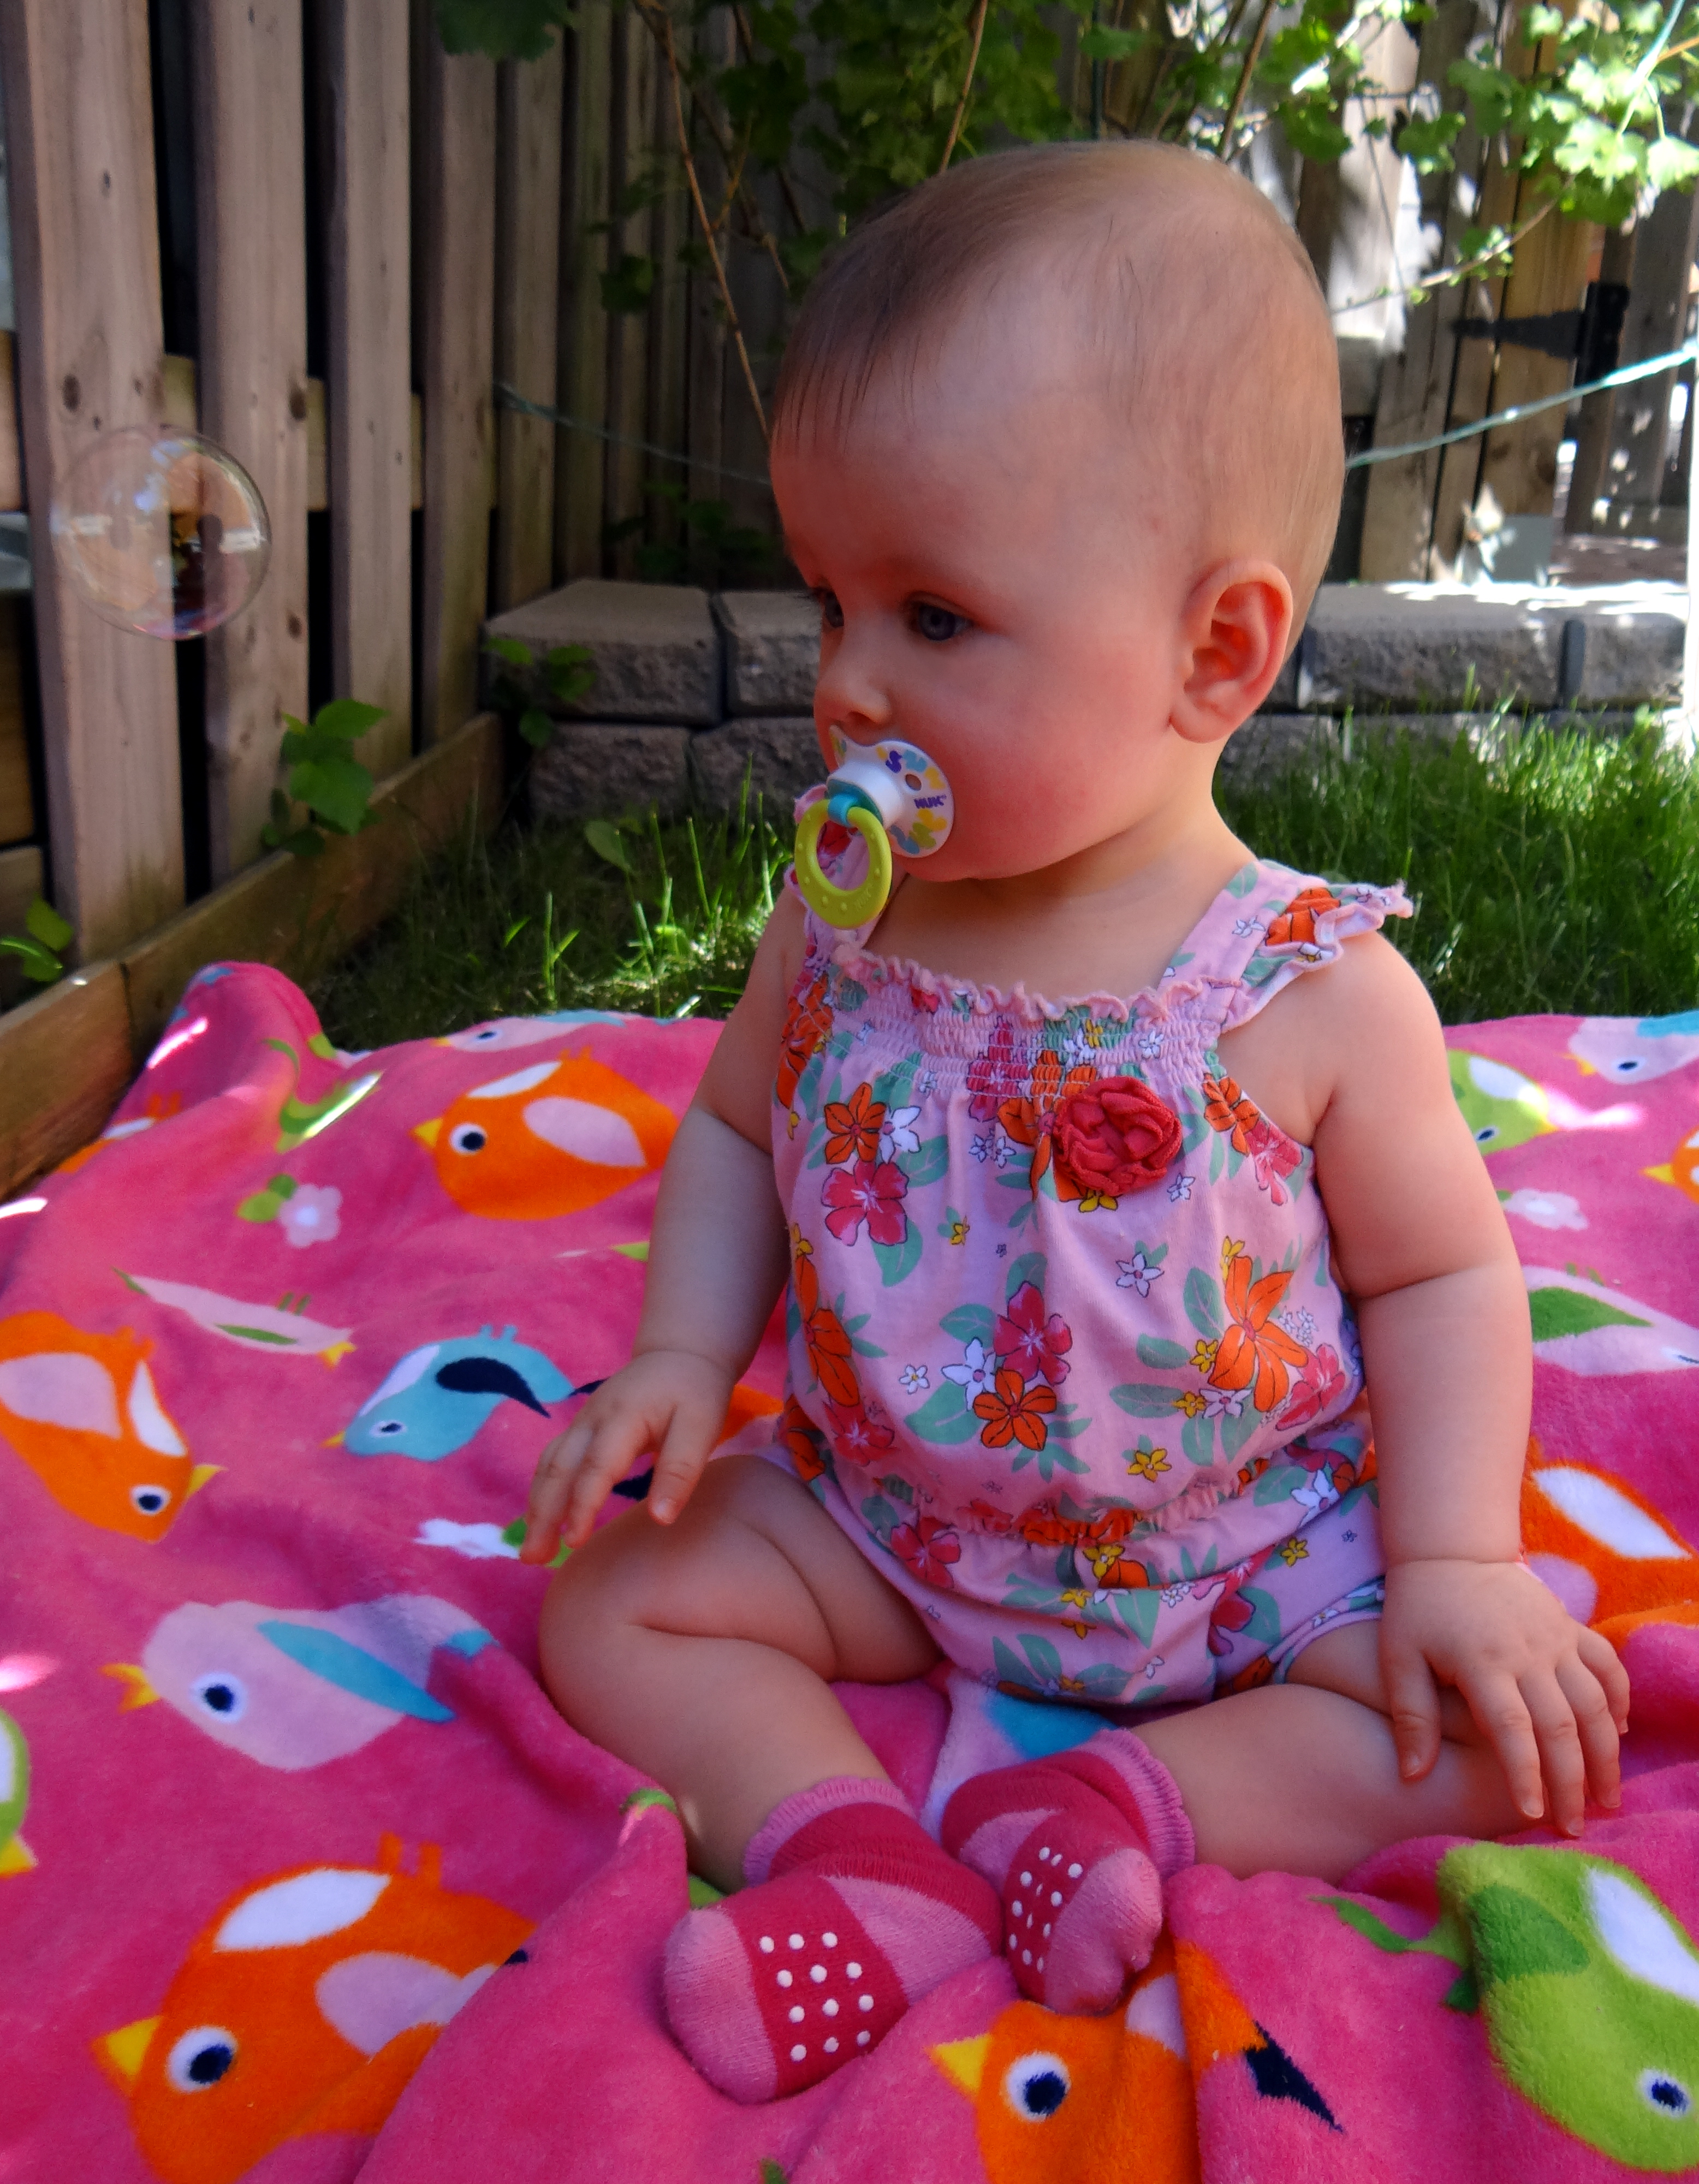 Baby girl having outdoor fun with bubbles